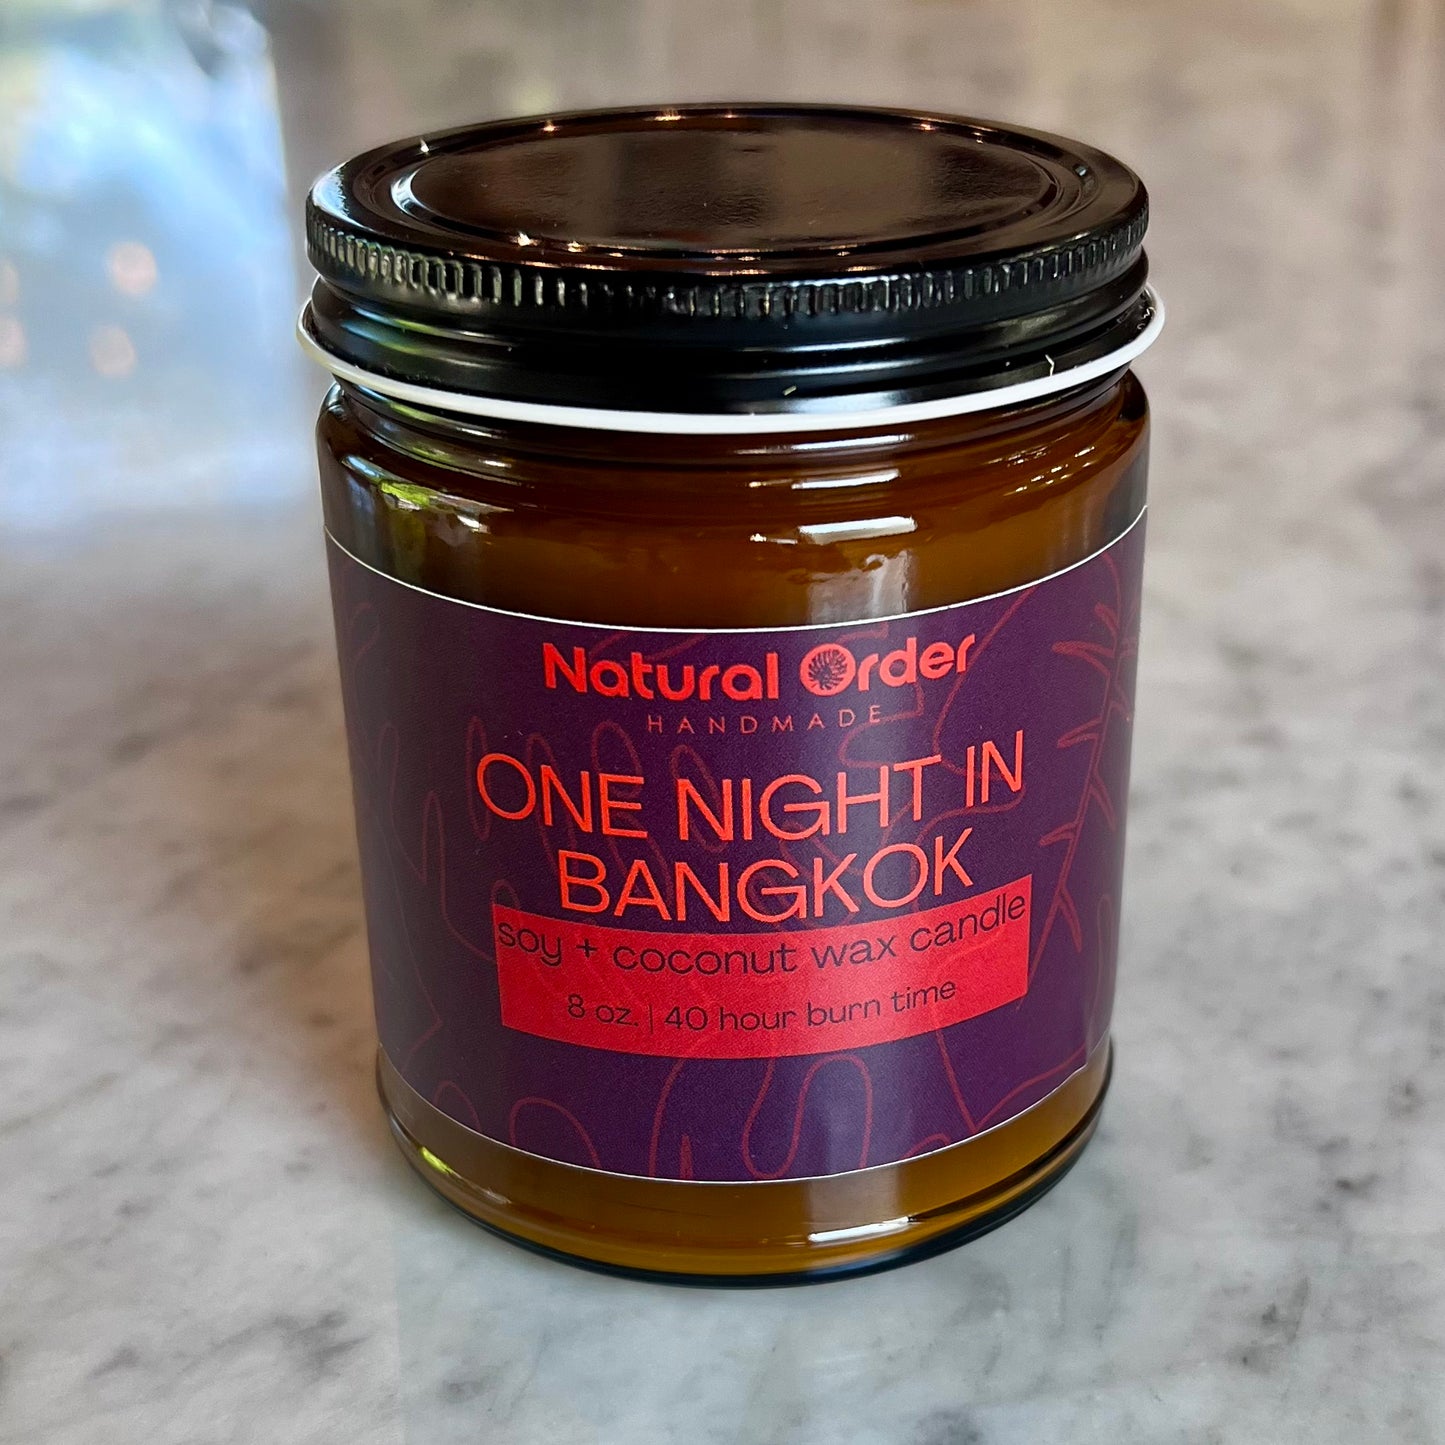 One Night In Bangkok Soy-Coconut Candle 8 ounce